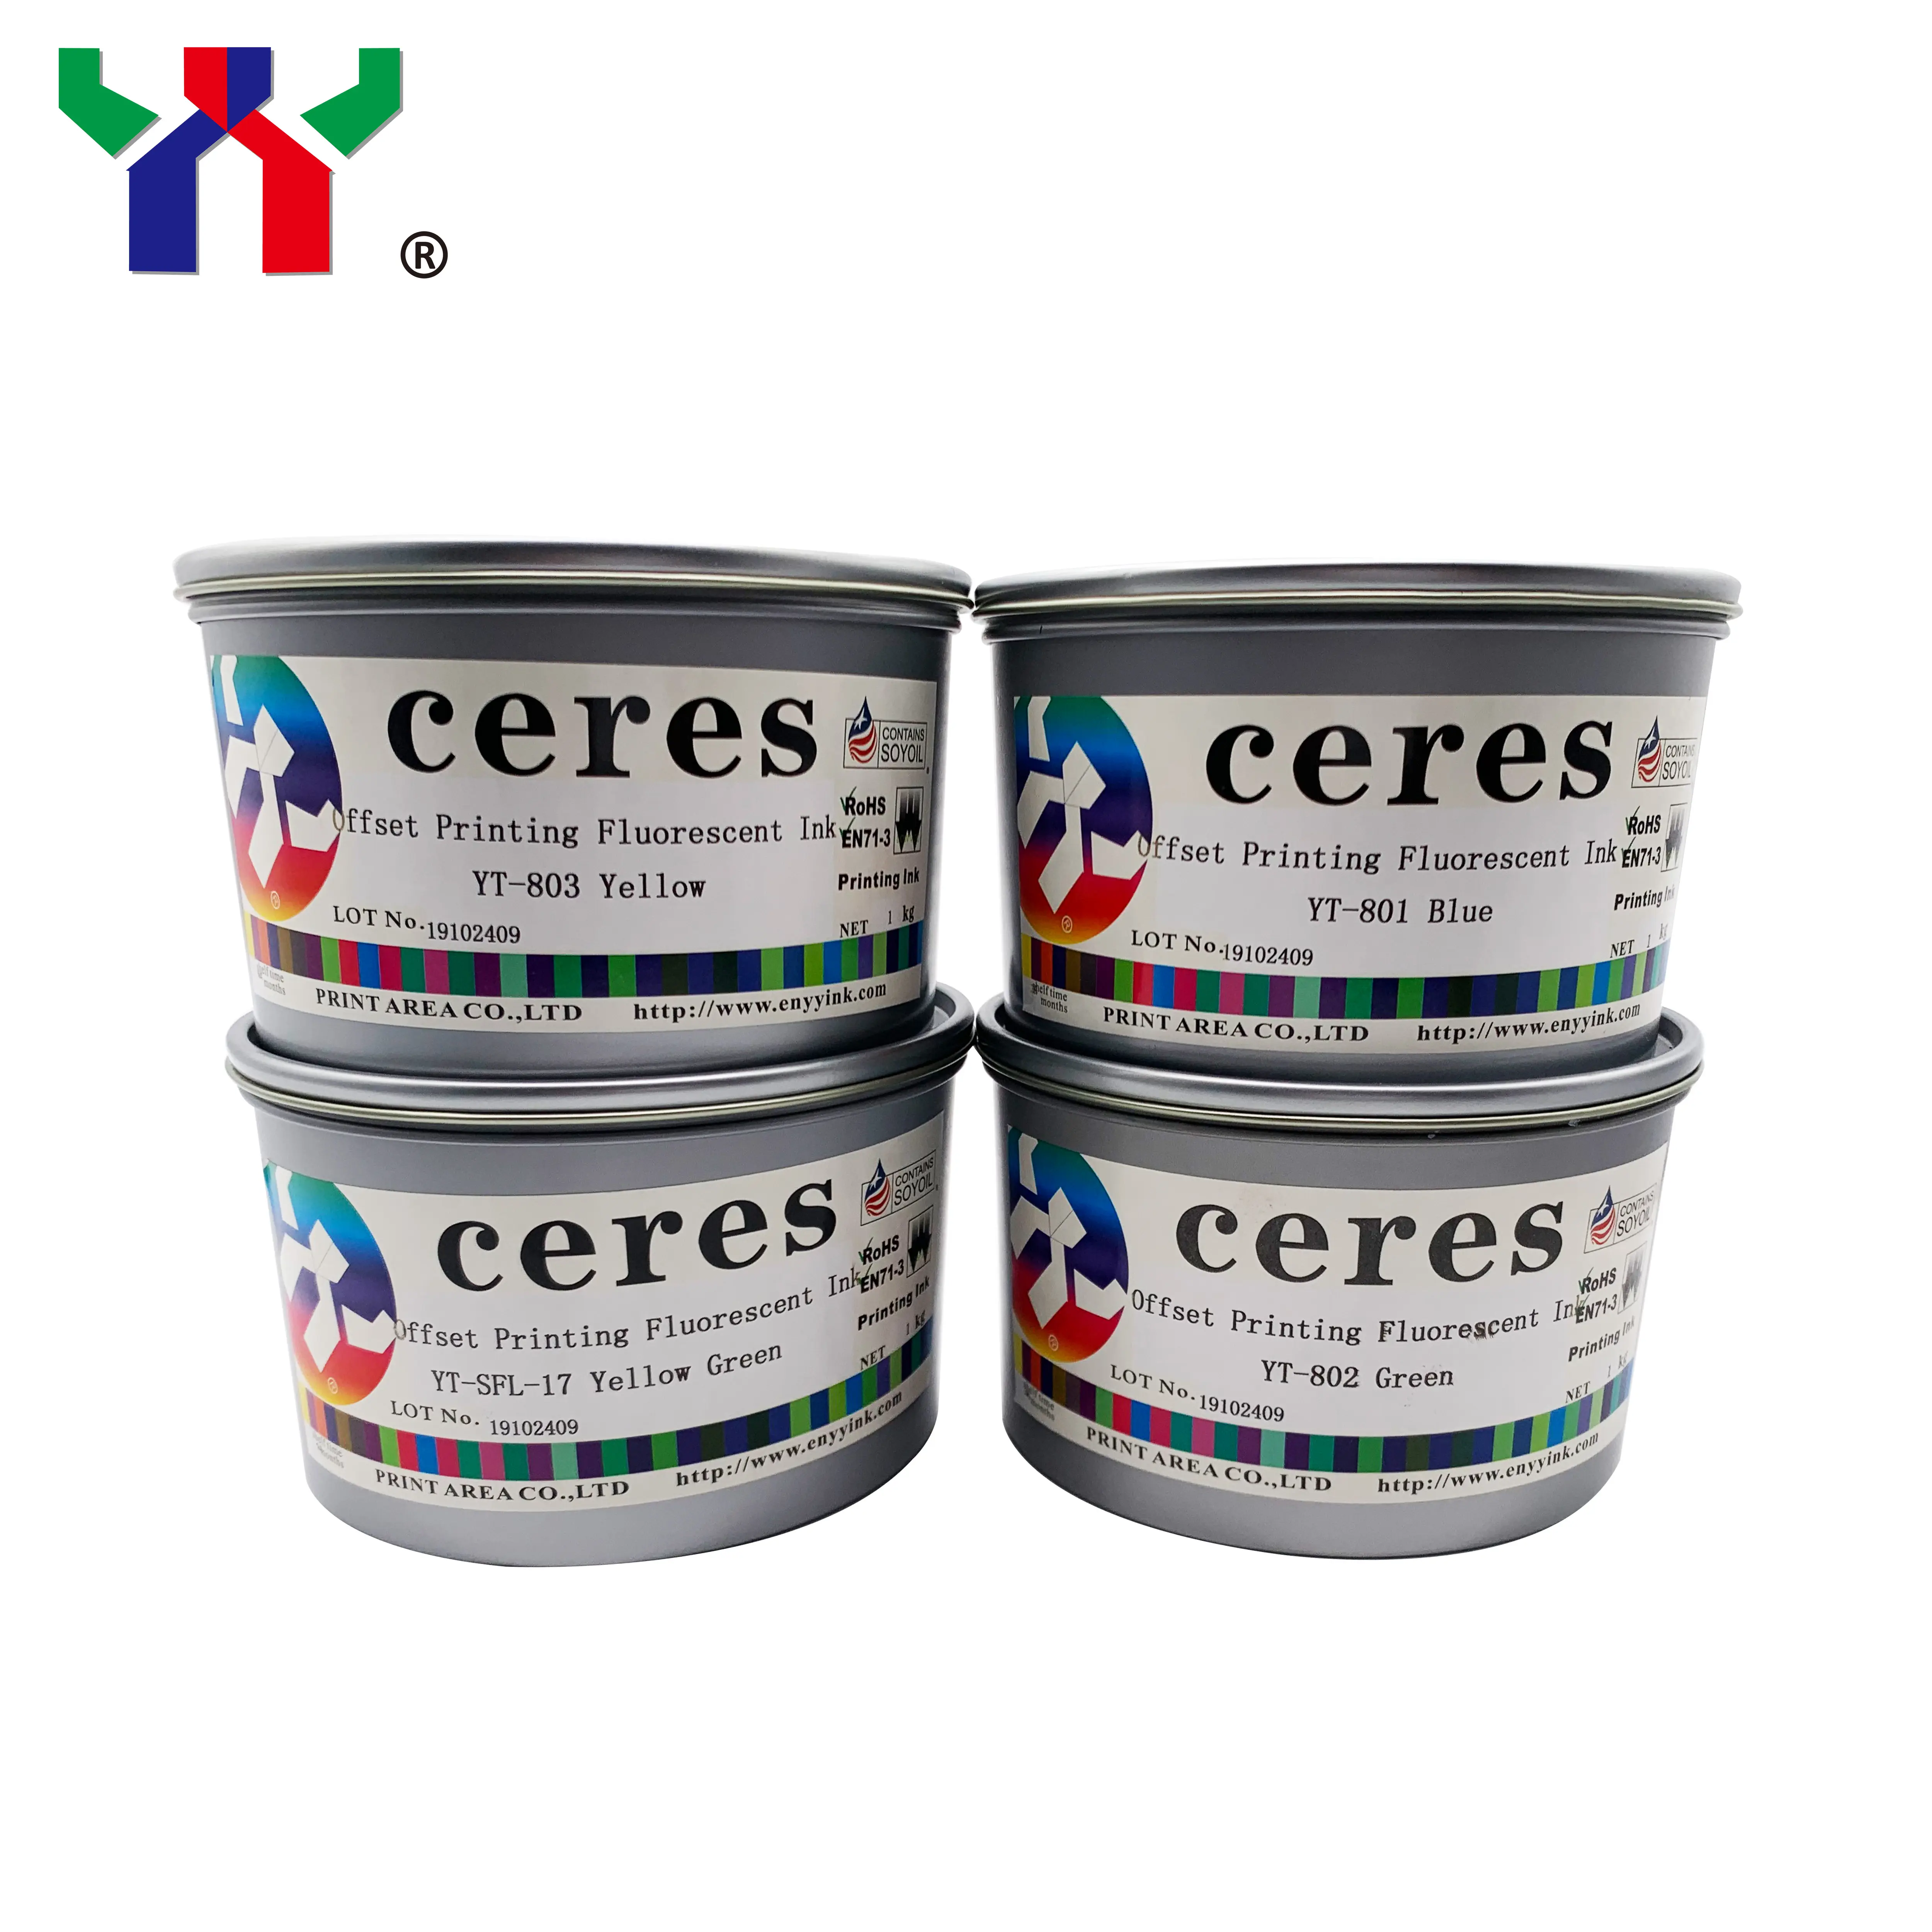 Explosive Product High Quality Ceres Offset Printing Fluorescent Ink Air Dry - Pantone YT-801-807 1 Kg/can